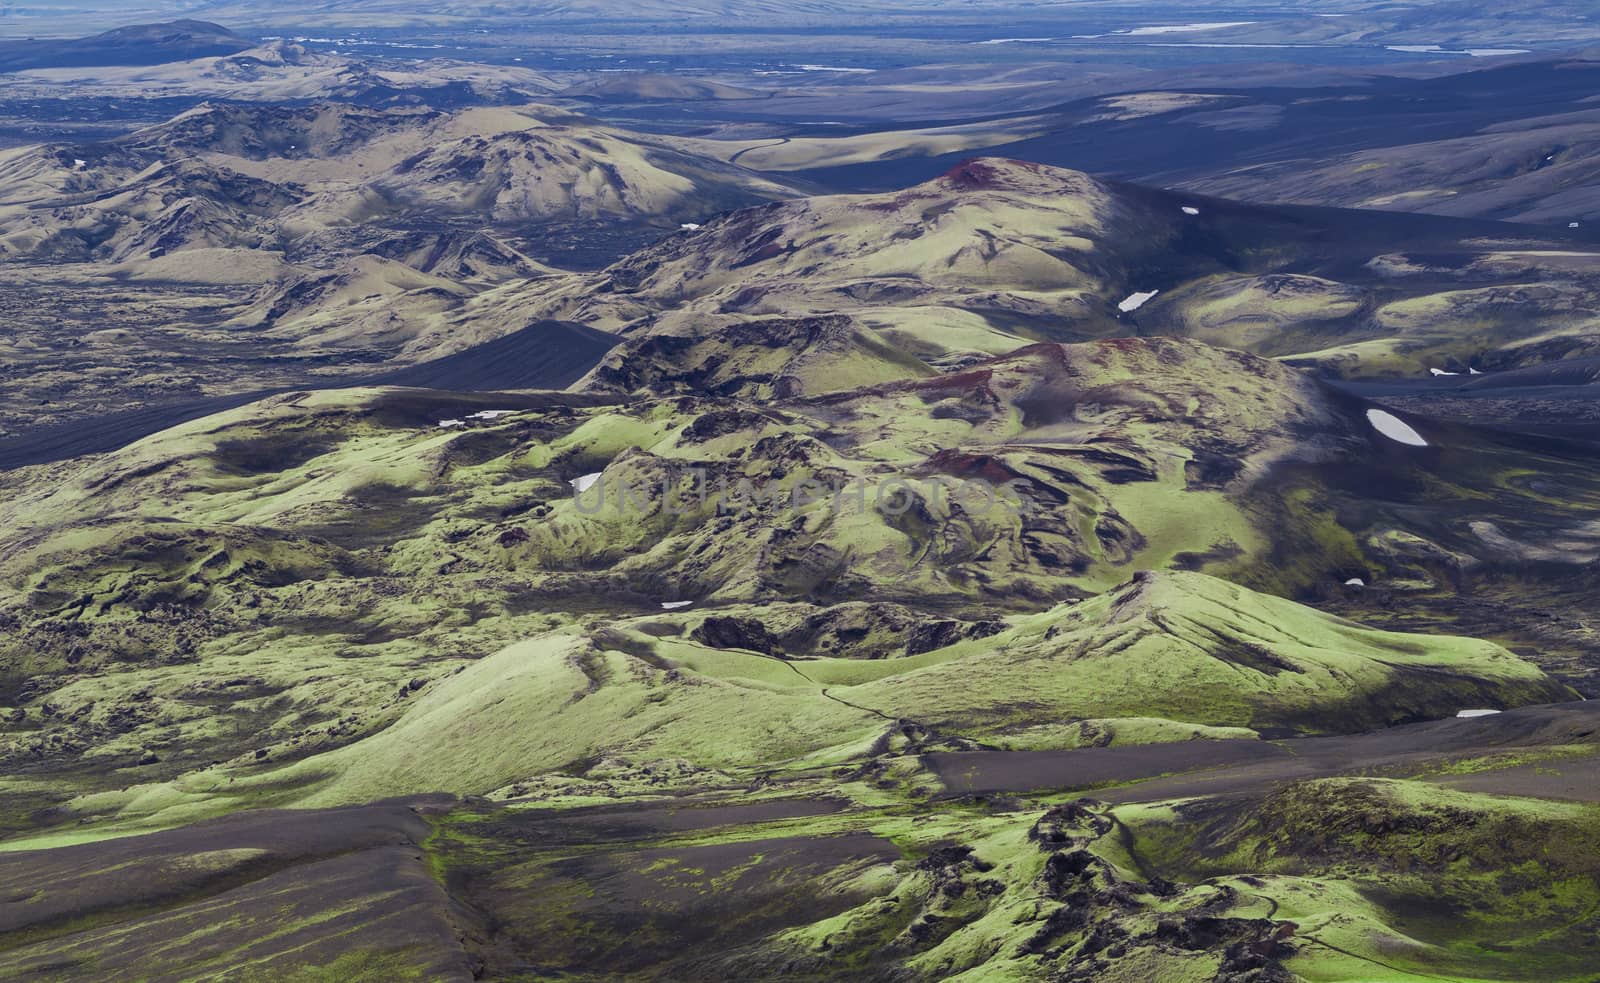 View on colorful Volcanic landscape in Lakagigar, Laki Volcano crater chain with hills covered green and yellow lichens, Iceland